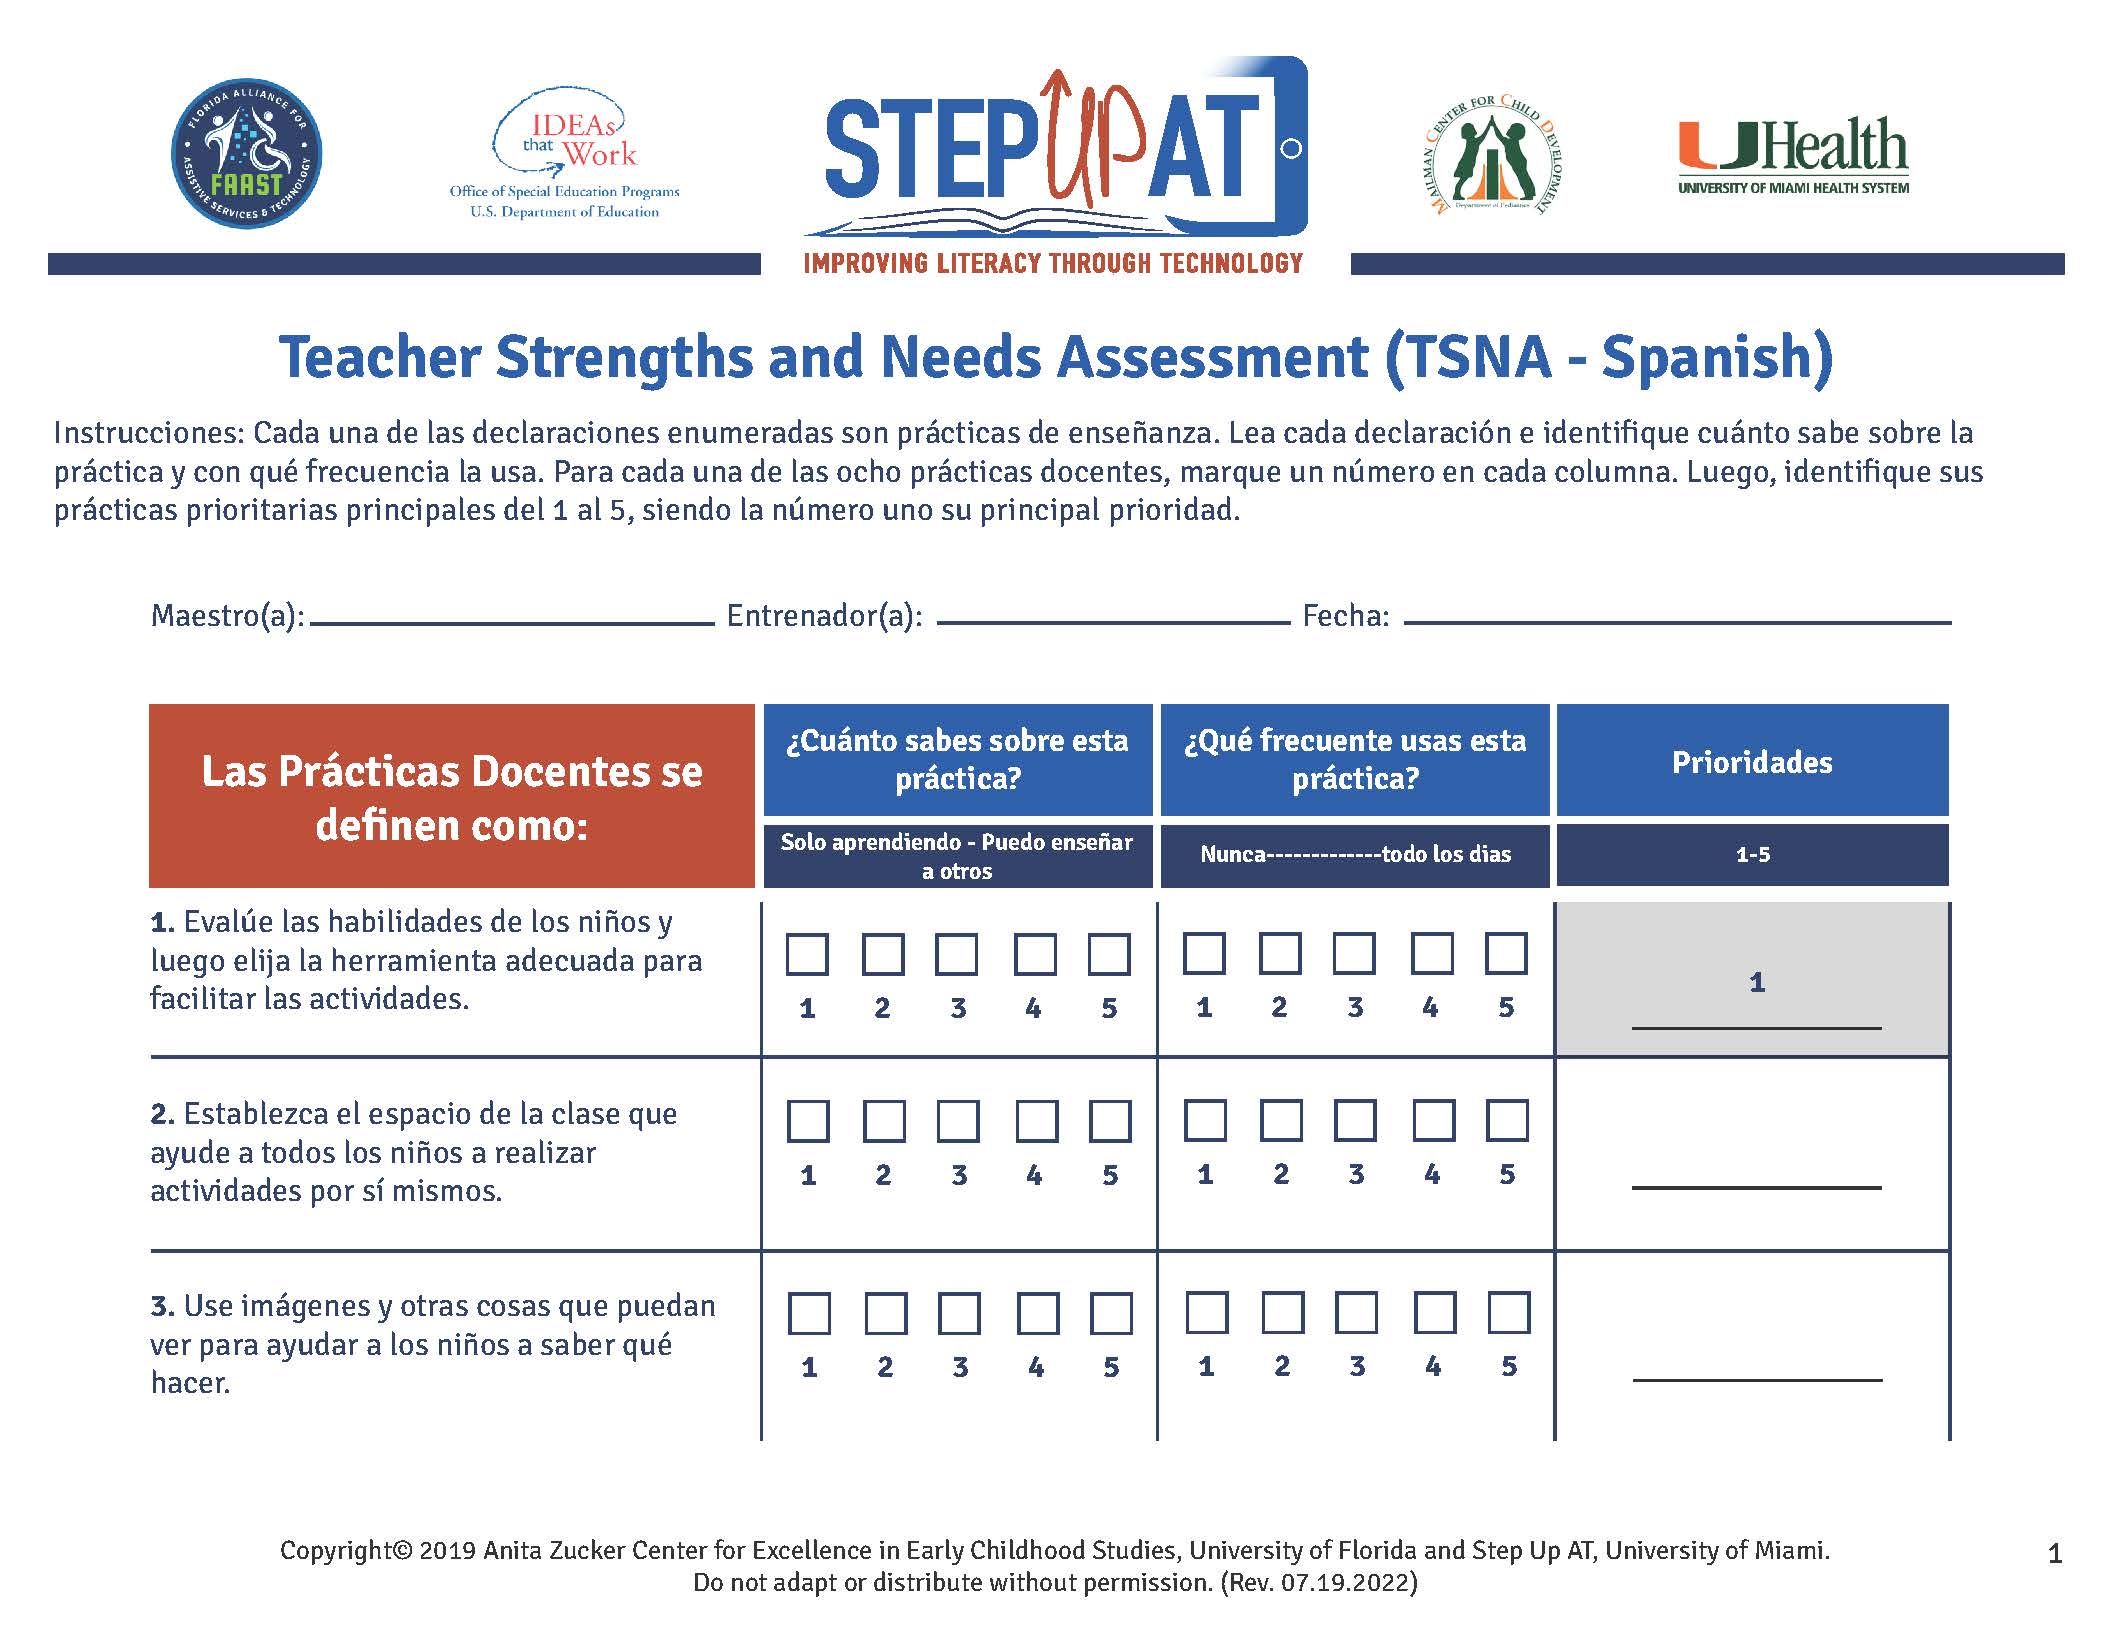 TNSA - Teacher Strengths and Needs Assessment form in Spanish by Step Up AT screenshot